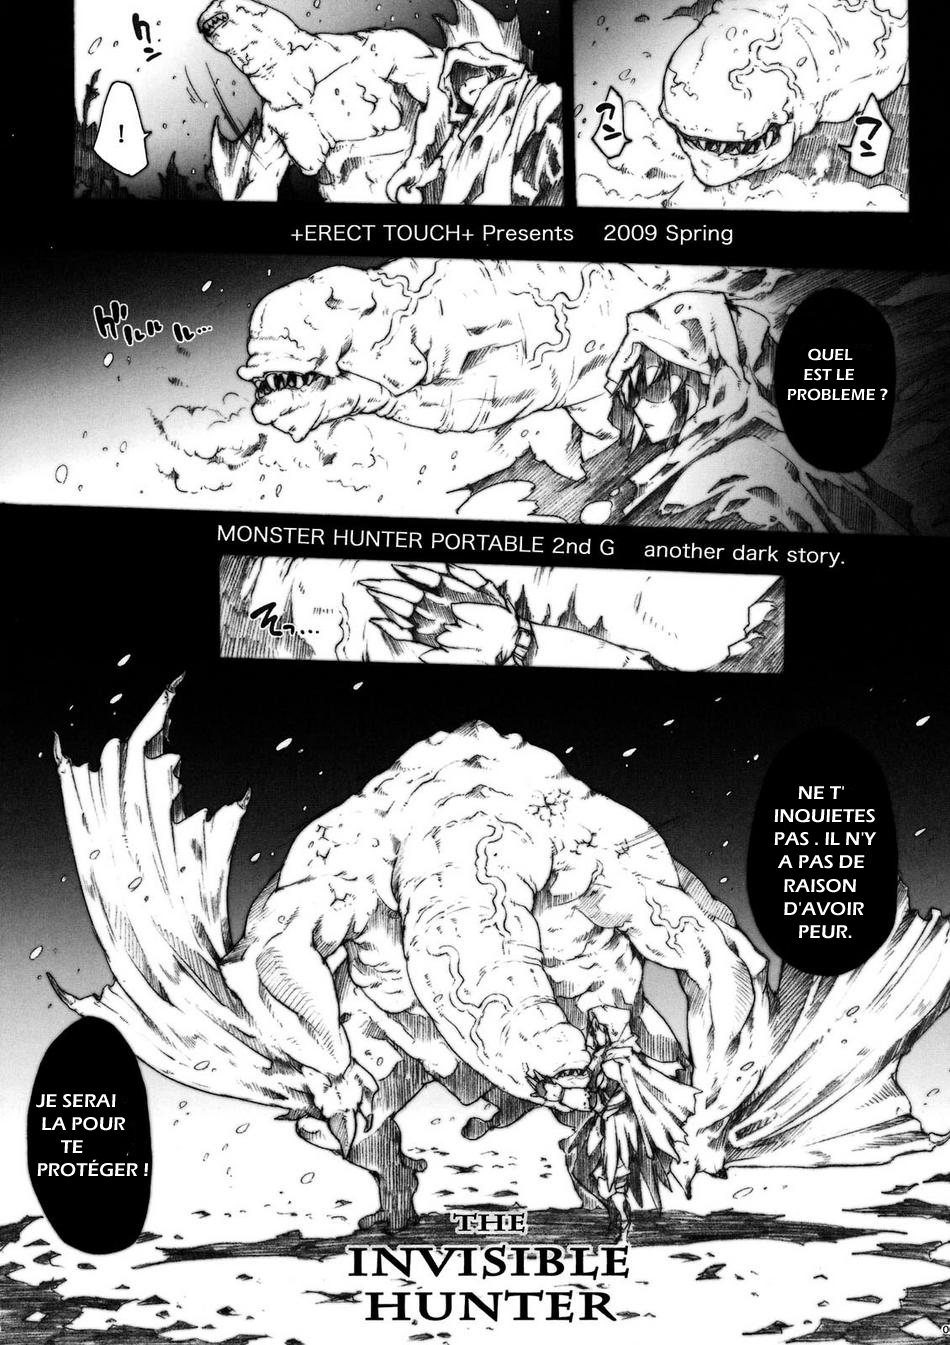 (COMIC1☆3) [ERECT TOUCH (Erect Sawaru)] Invisible Hunter (Monster Hunter) [French] page 9 full